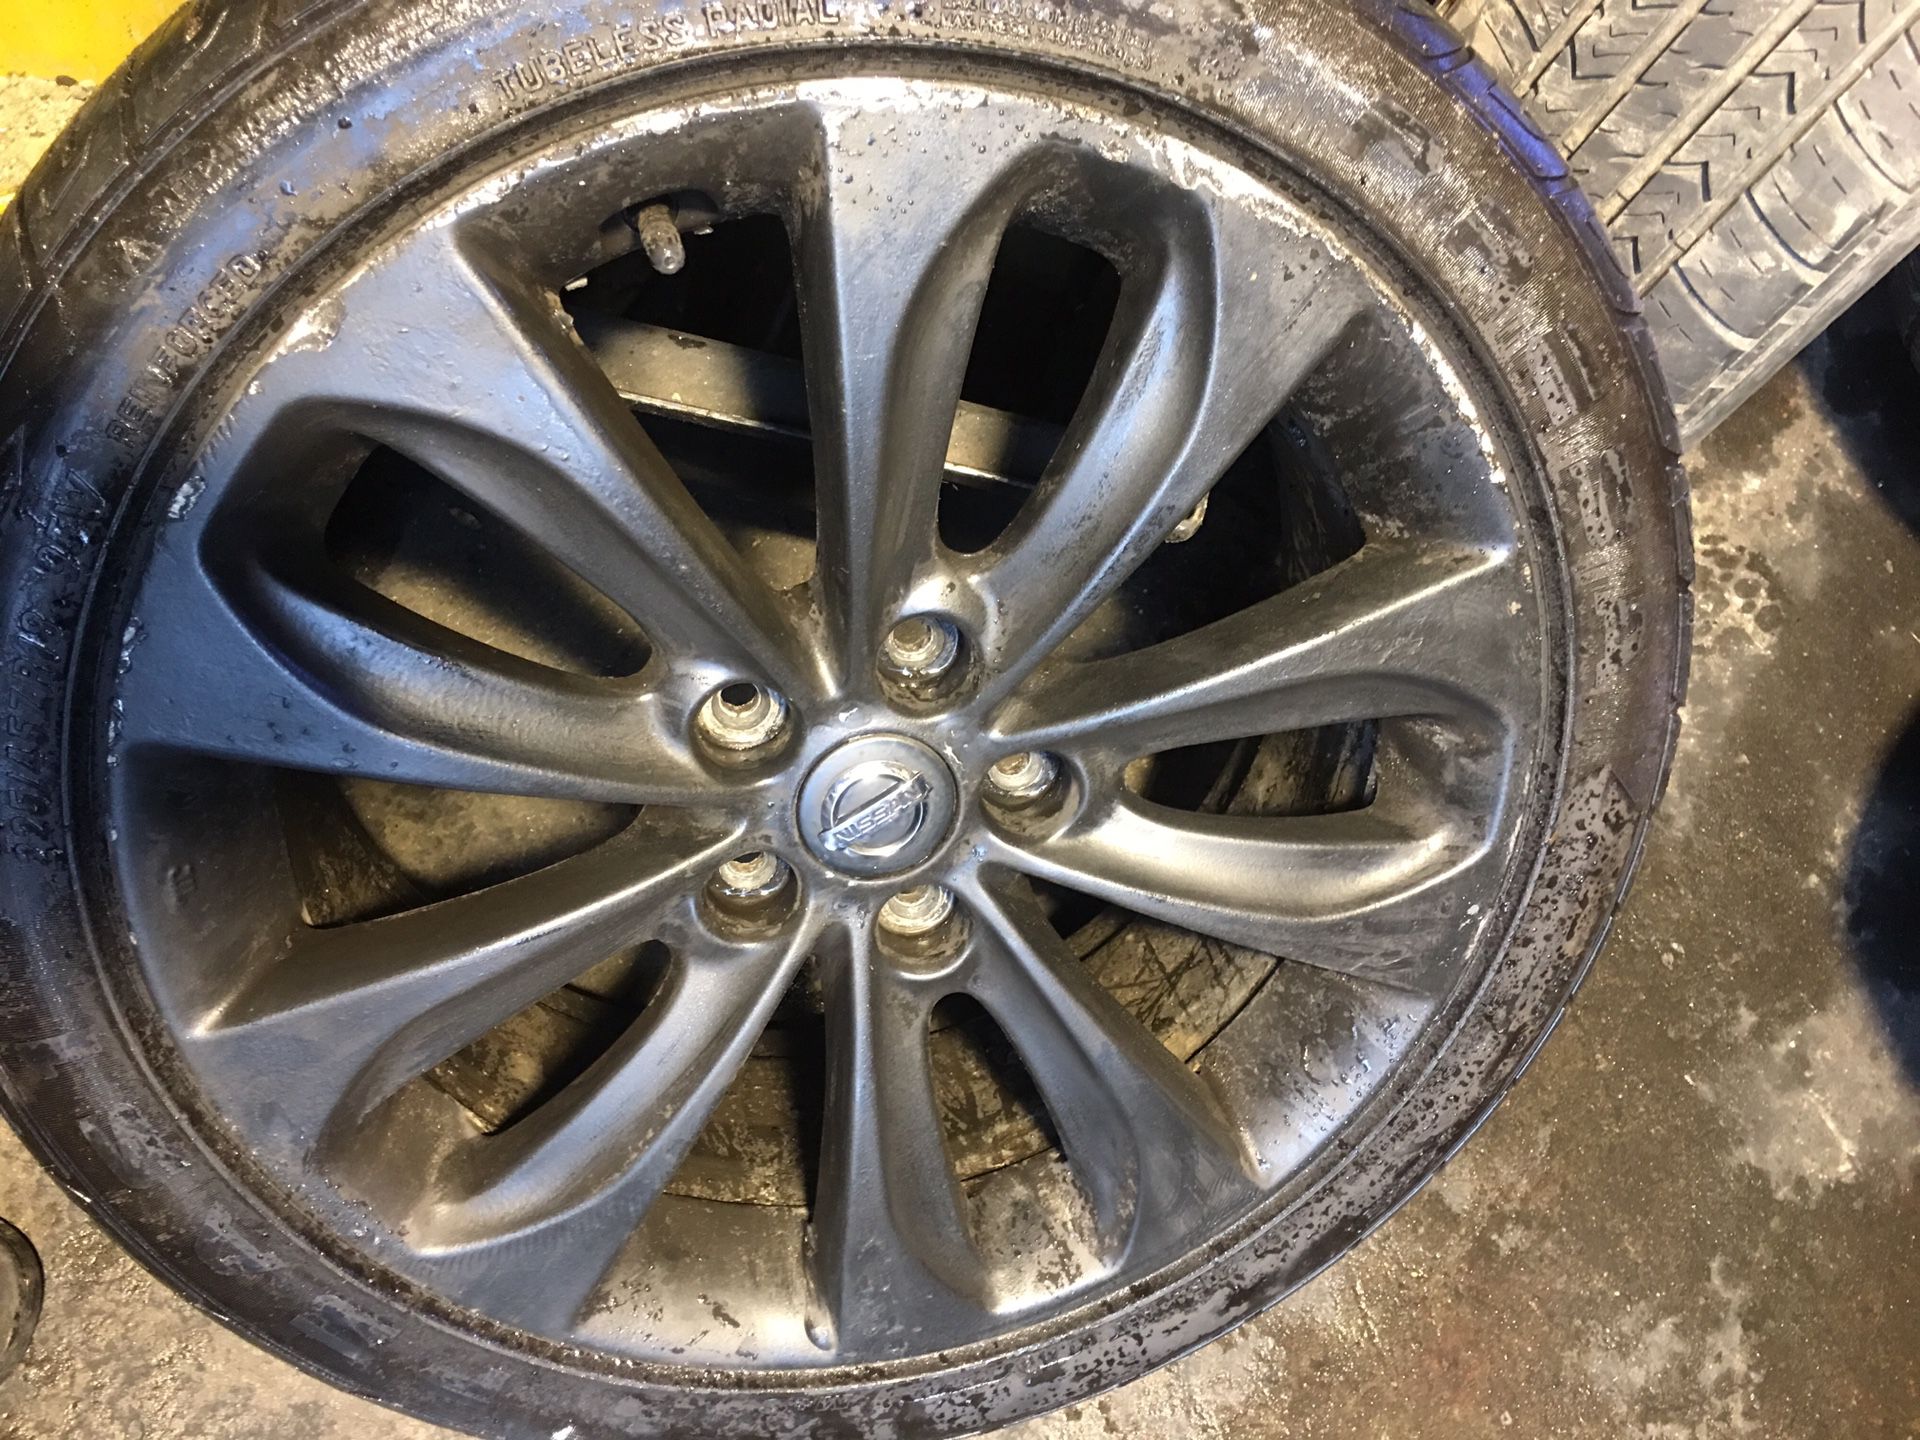 4-Nissan rims and tires 18”